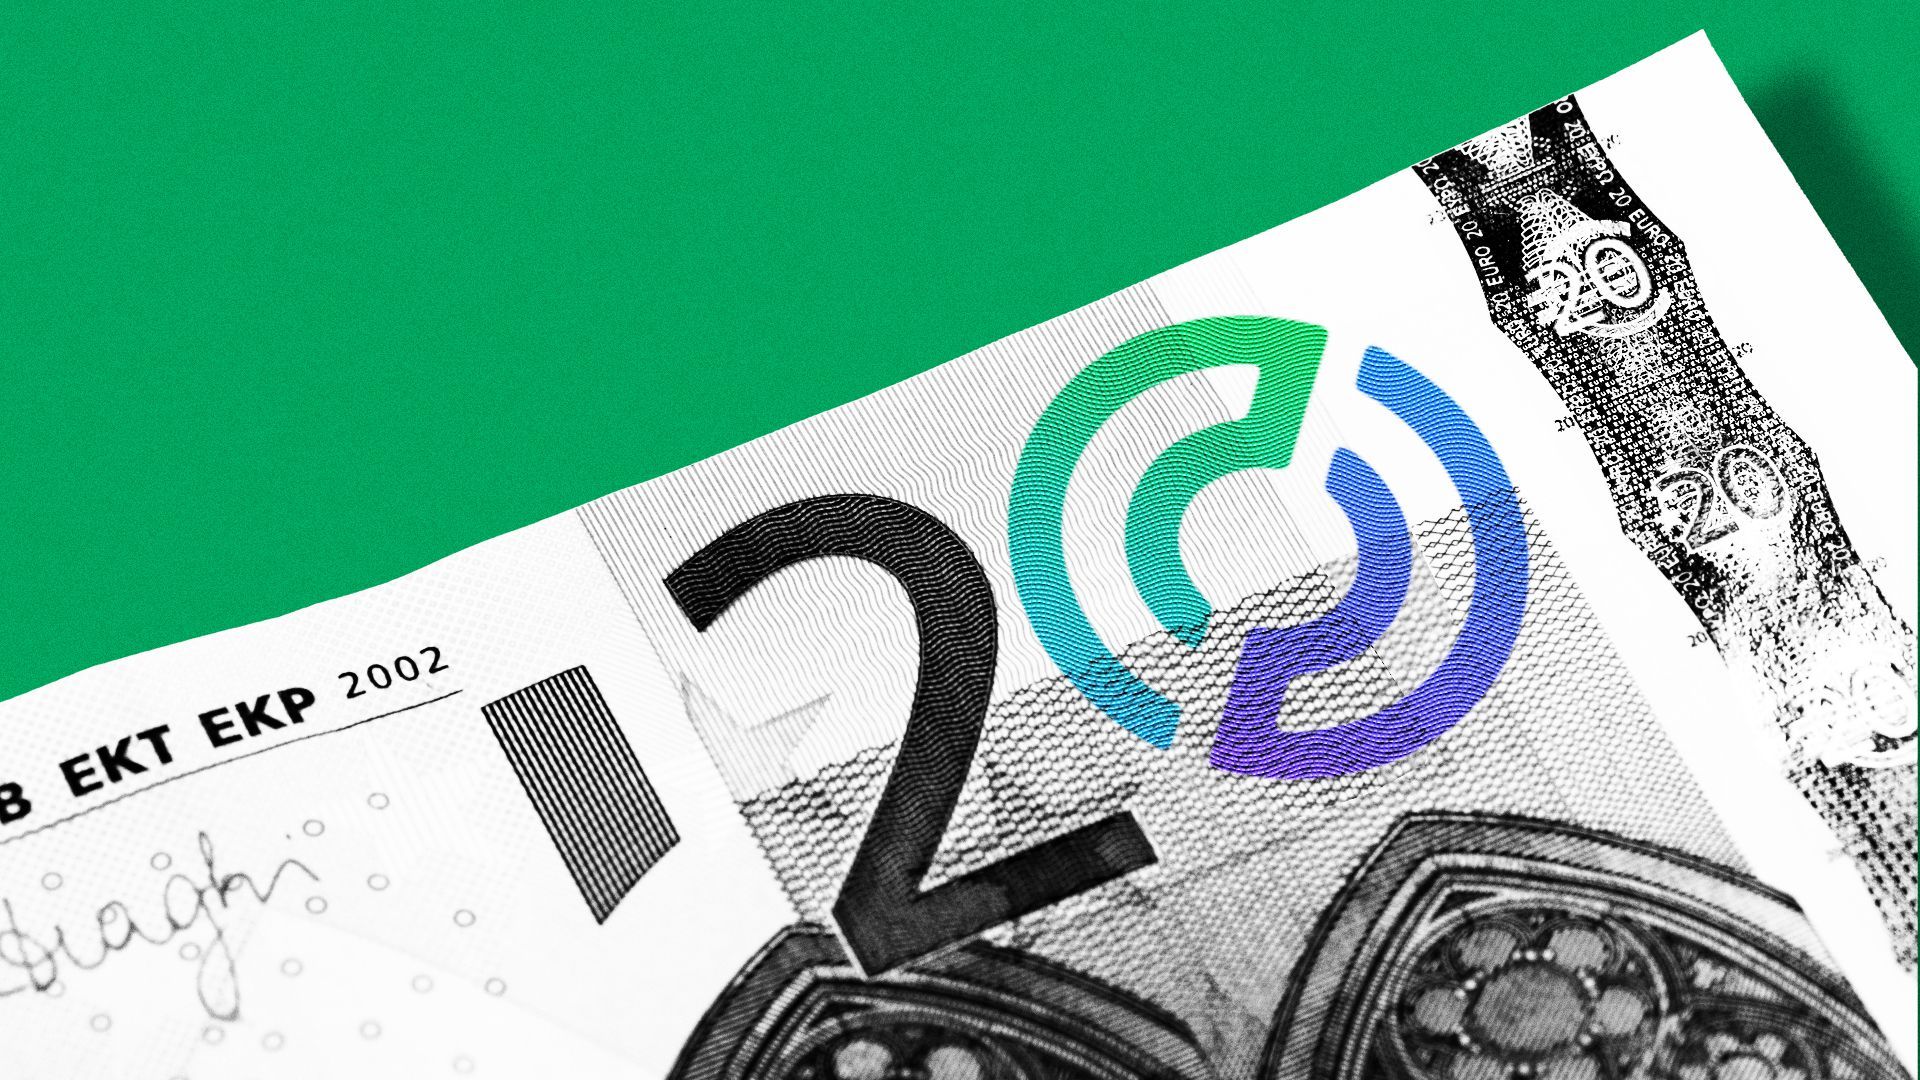 Illustration of the zero on a euro bill replaced with the logo for Circle Internet Financial.